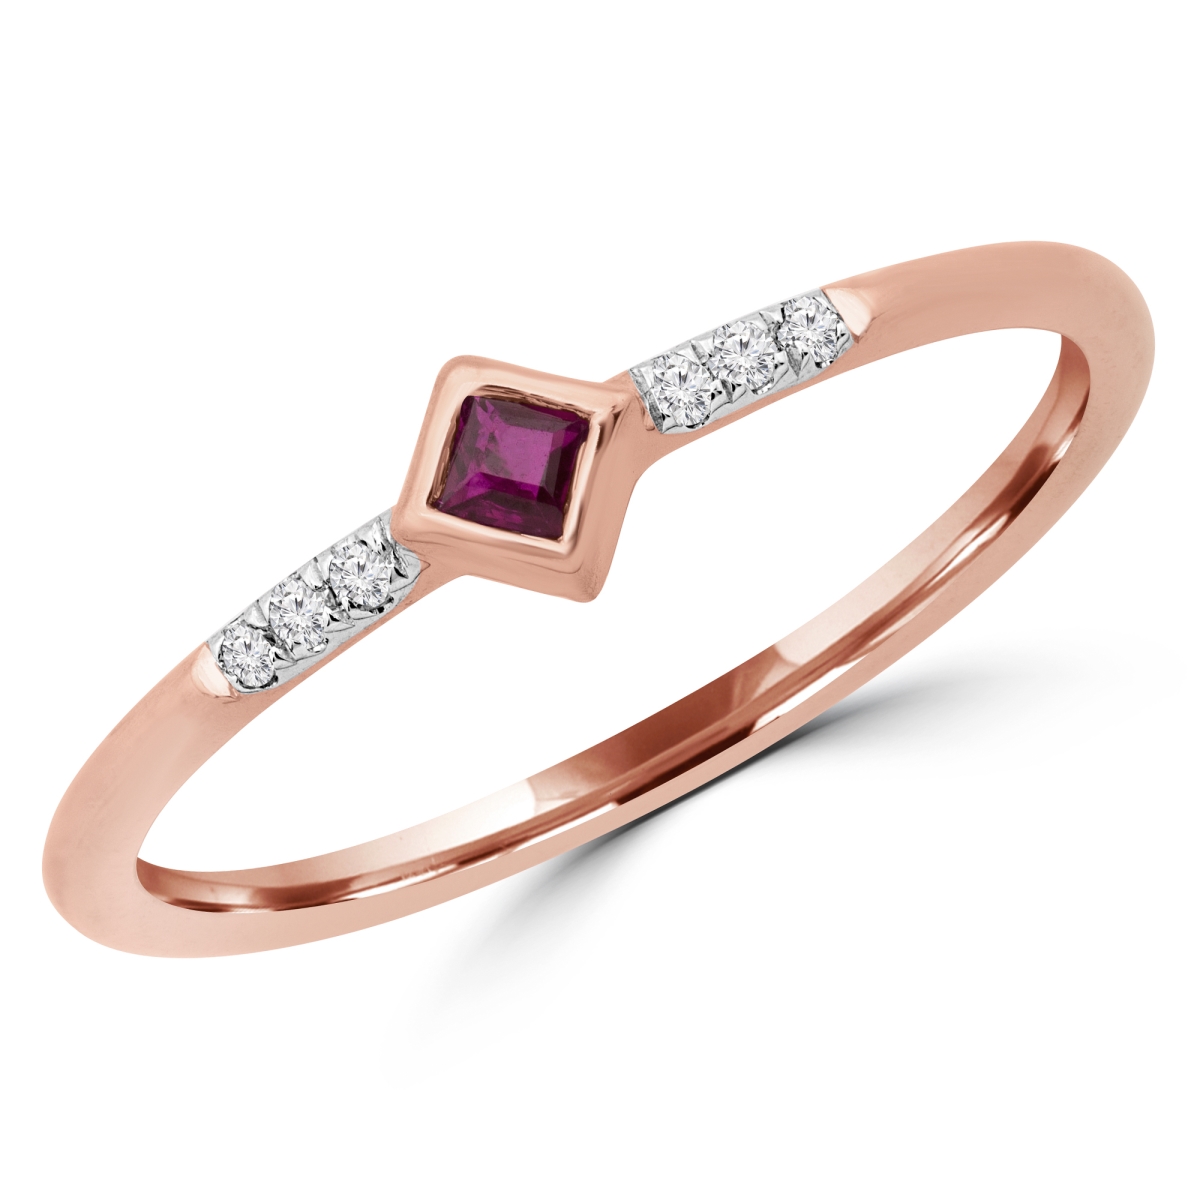 Picture of Majesty Diamonds MDR190078-7.75 0.1 CTW Round Red Ruby Bezel Set Cocktail Ring in 14K Rose Gold - Size 7.75